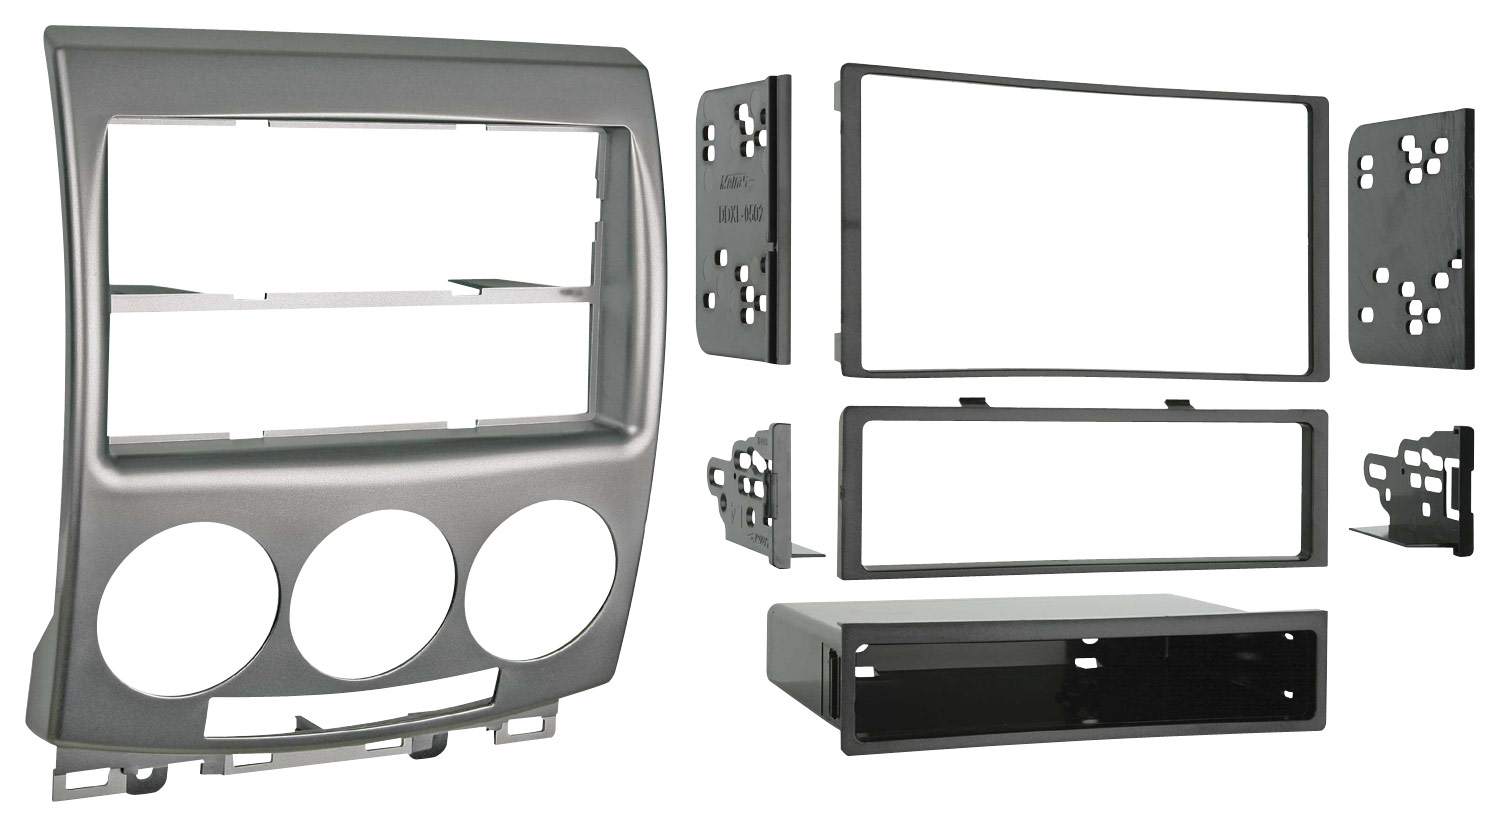 Metra - Dash Kit for Select 2006-2011 Mazda Mazda5 - Silver was $49.99 now $37.49 (25.0% off)